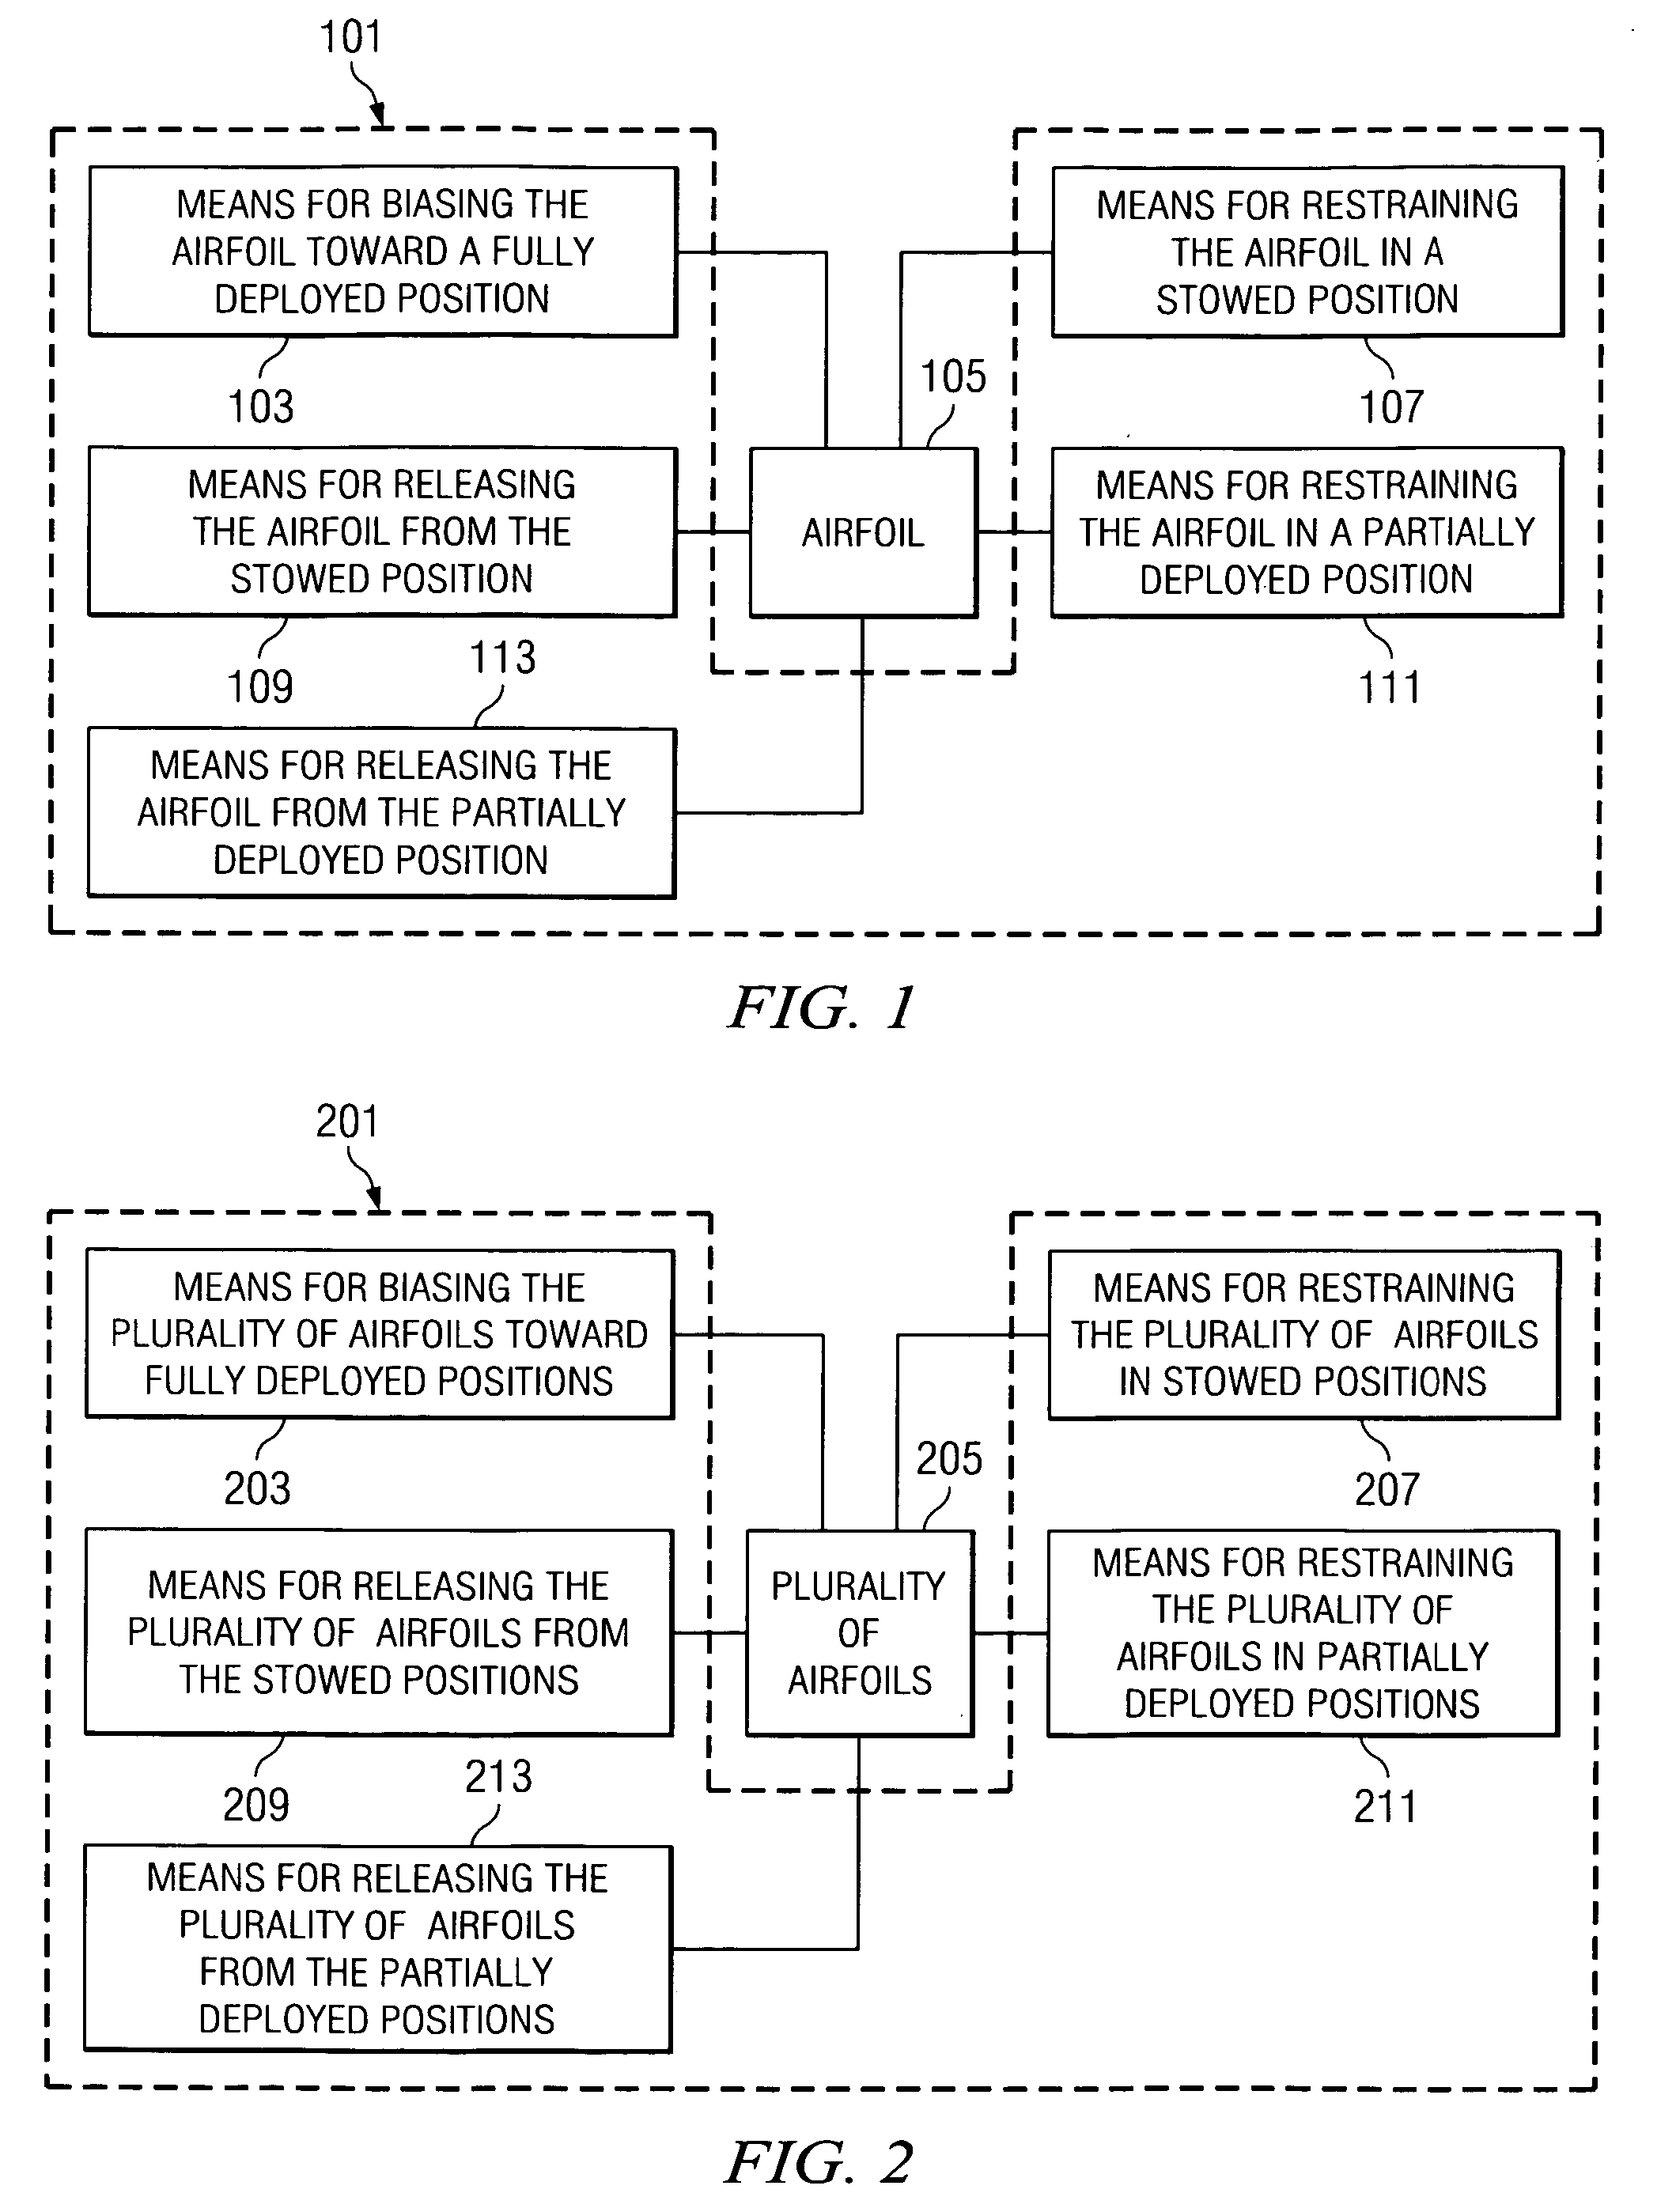 Apparatus and method for restraining and deploying an airfoil